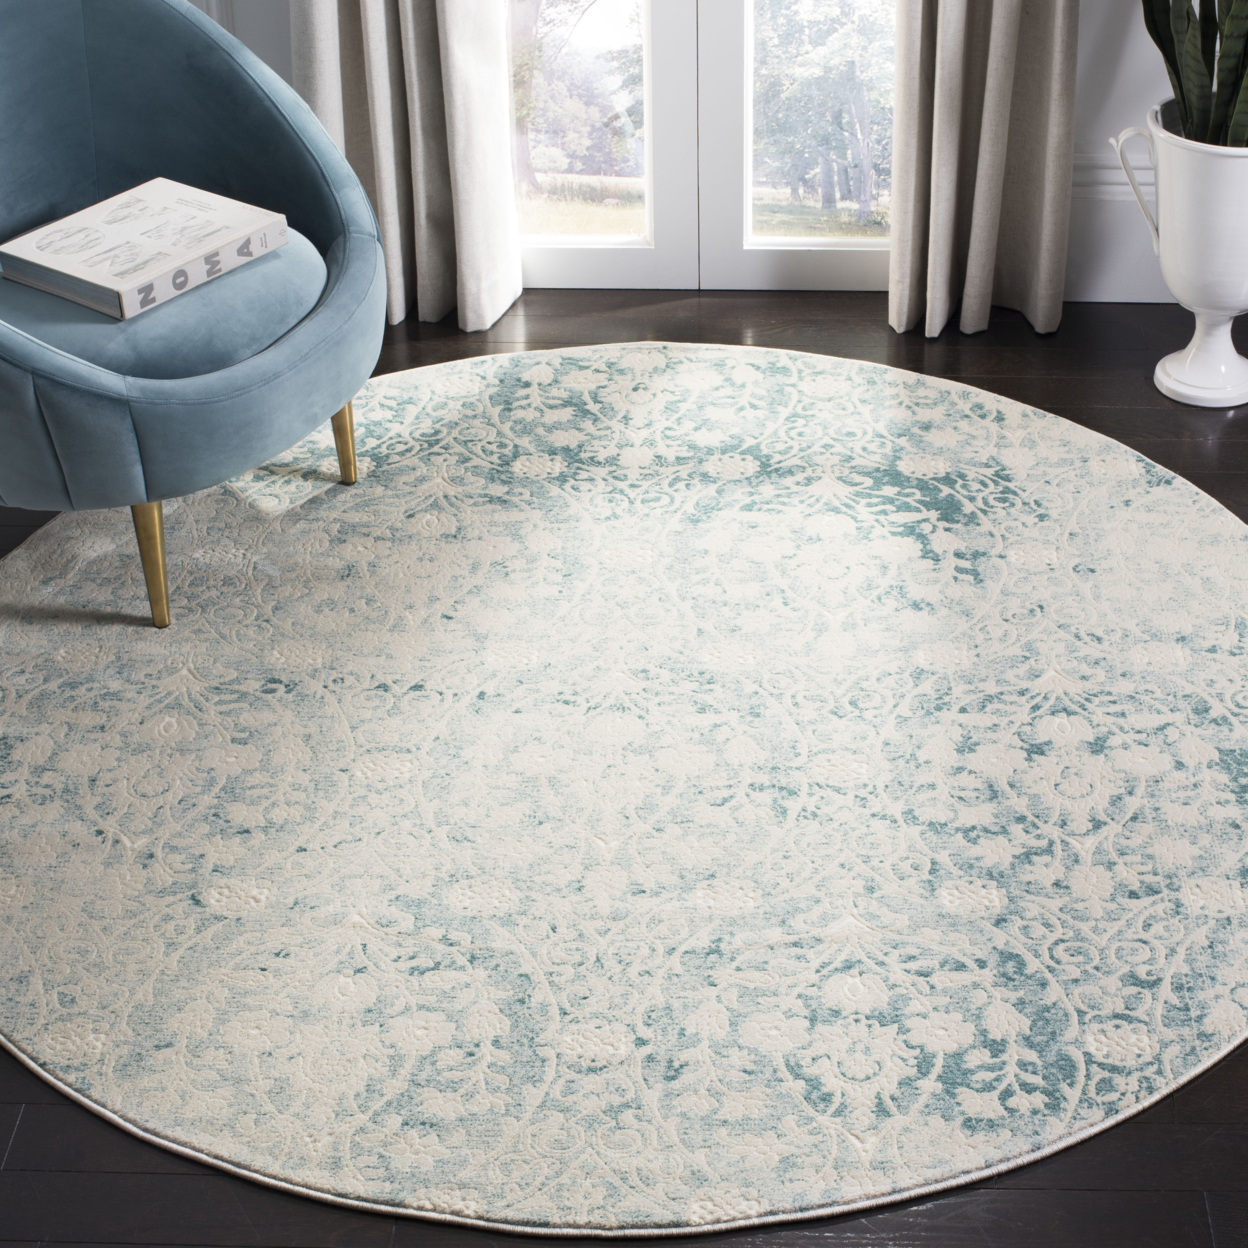 SAFAVIEH Passion Collection PAS403B Turquoise / Ivory Rug - 2' 2 X 8'